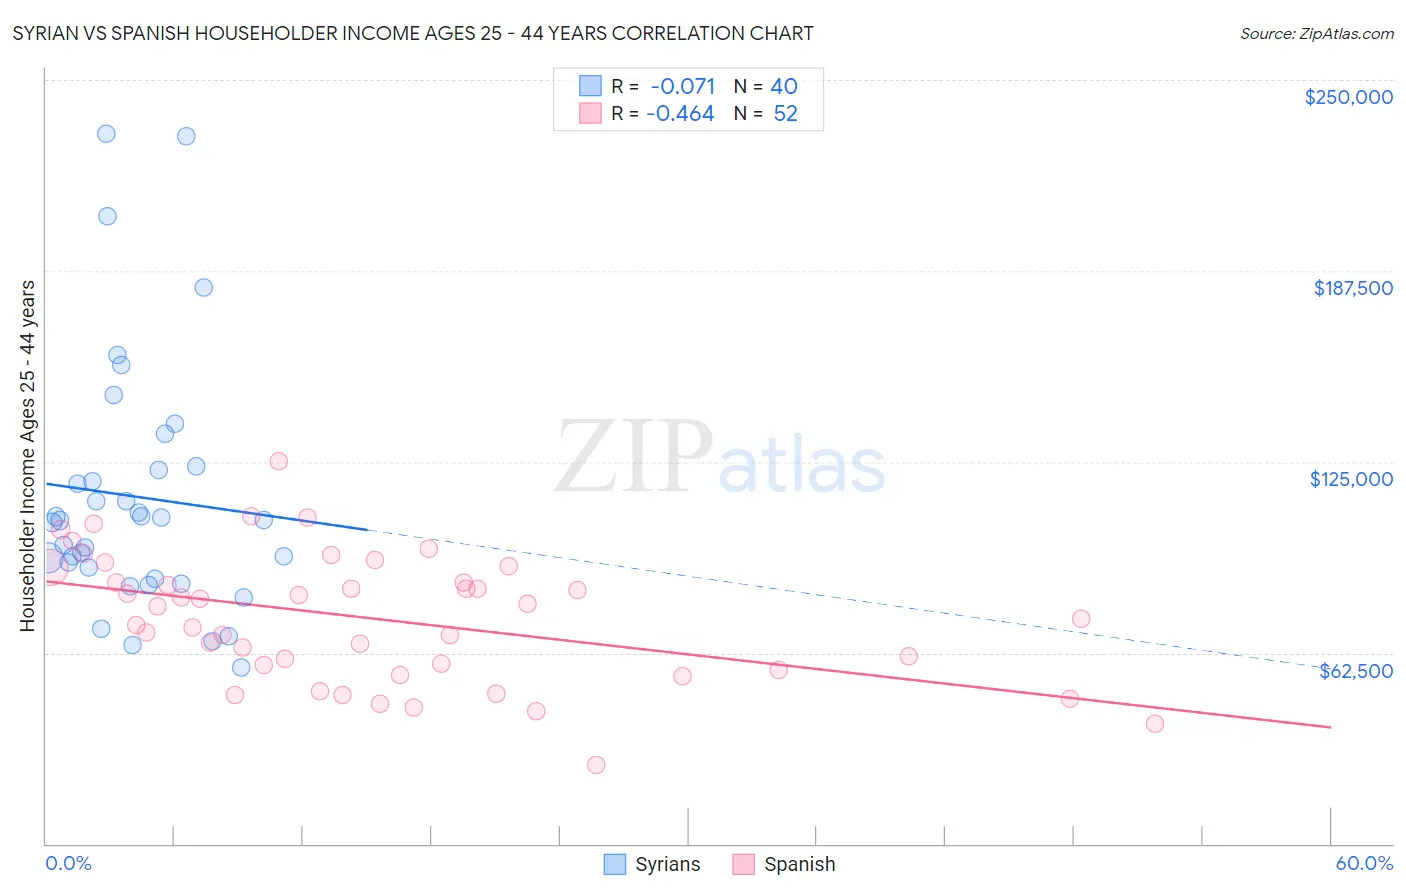 Syrian vs Spanish Householder Income Ages 25 - 44 years